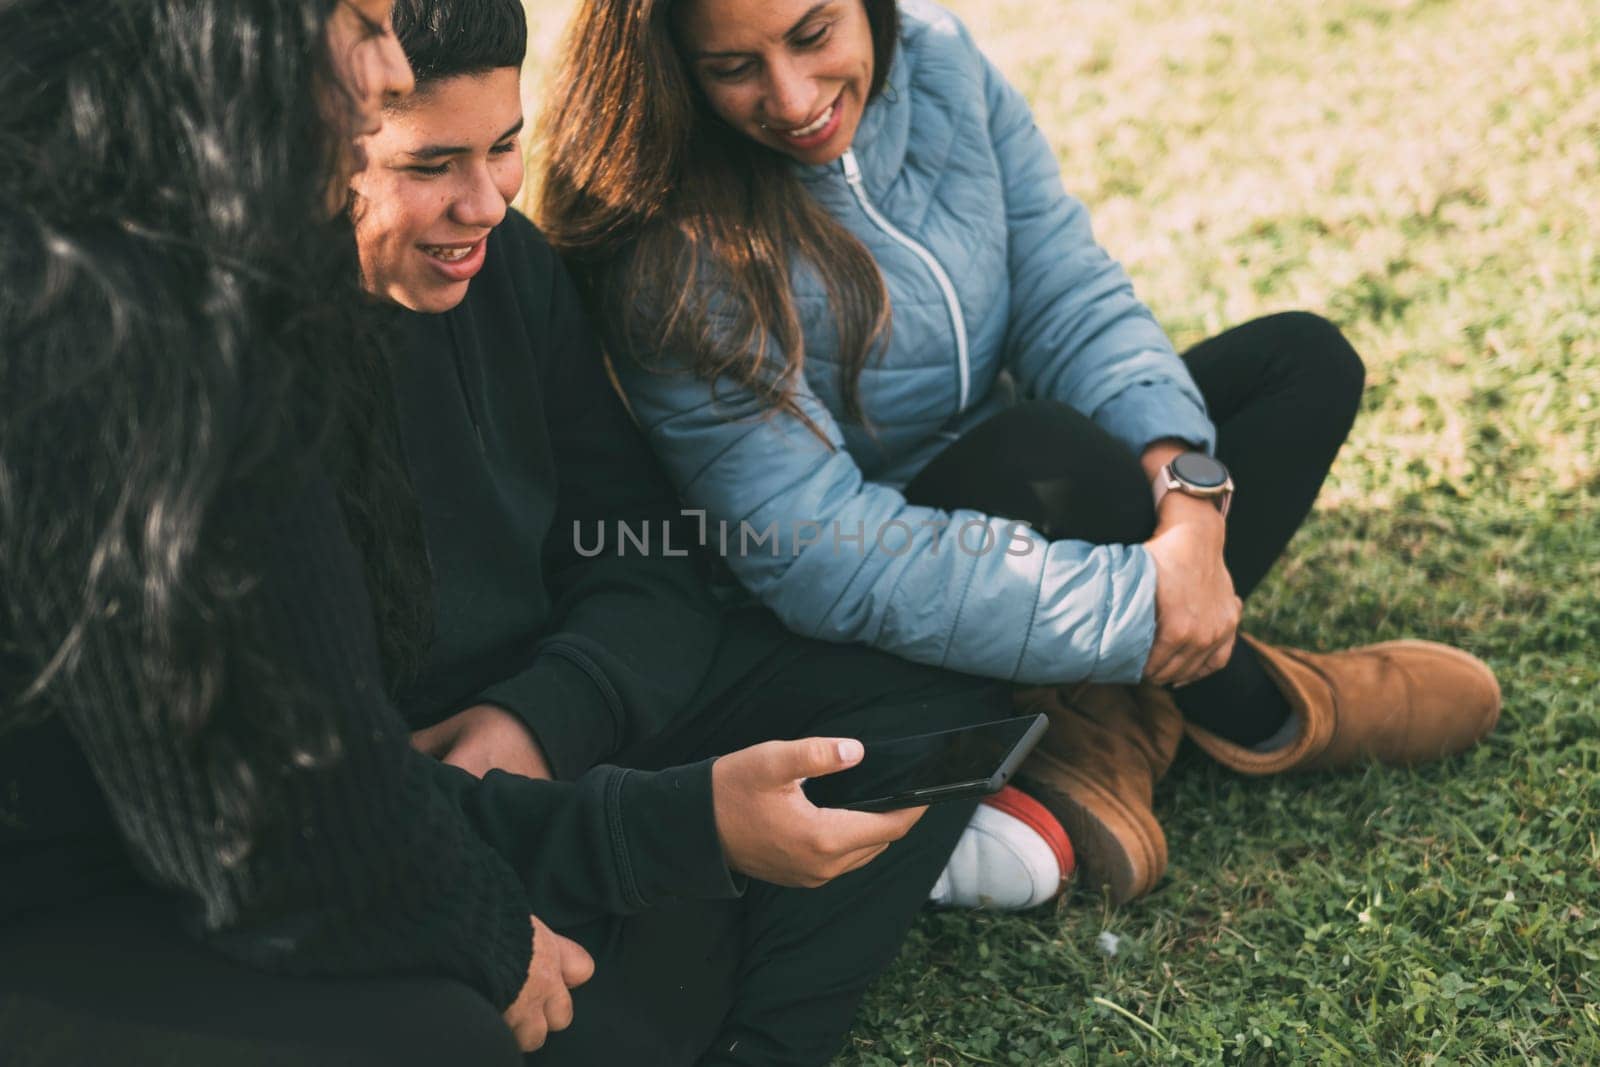 Hispanic family spending quality time together in a local park on a beautiful, sunny day. A teenage boy is sitting on the grass, holding his smartphone while looking away. His mother and sister are sitting next to him, looking at the camera and smiling.